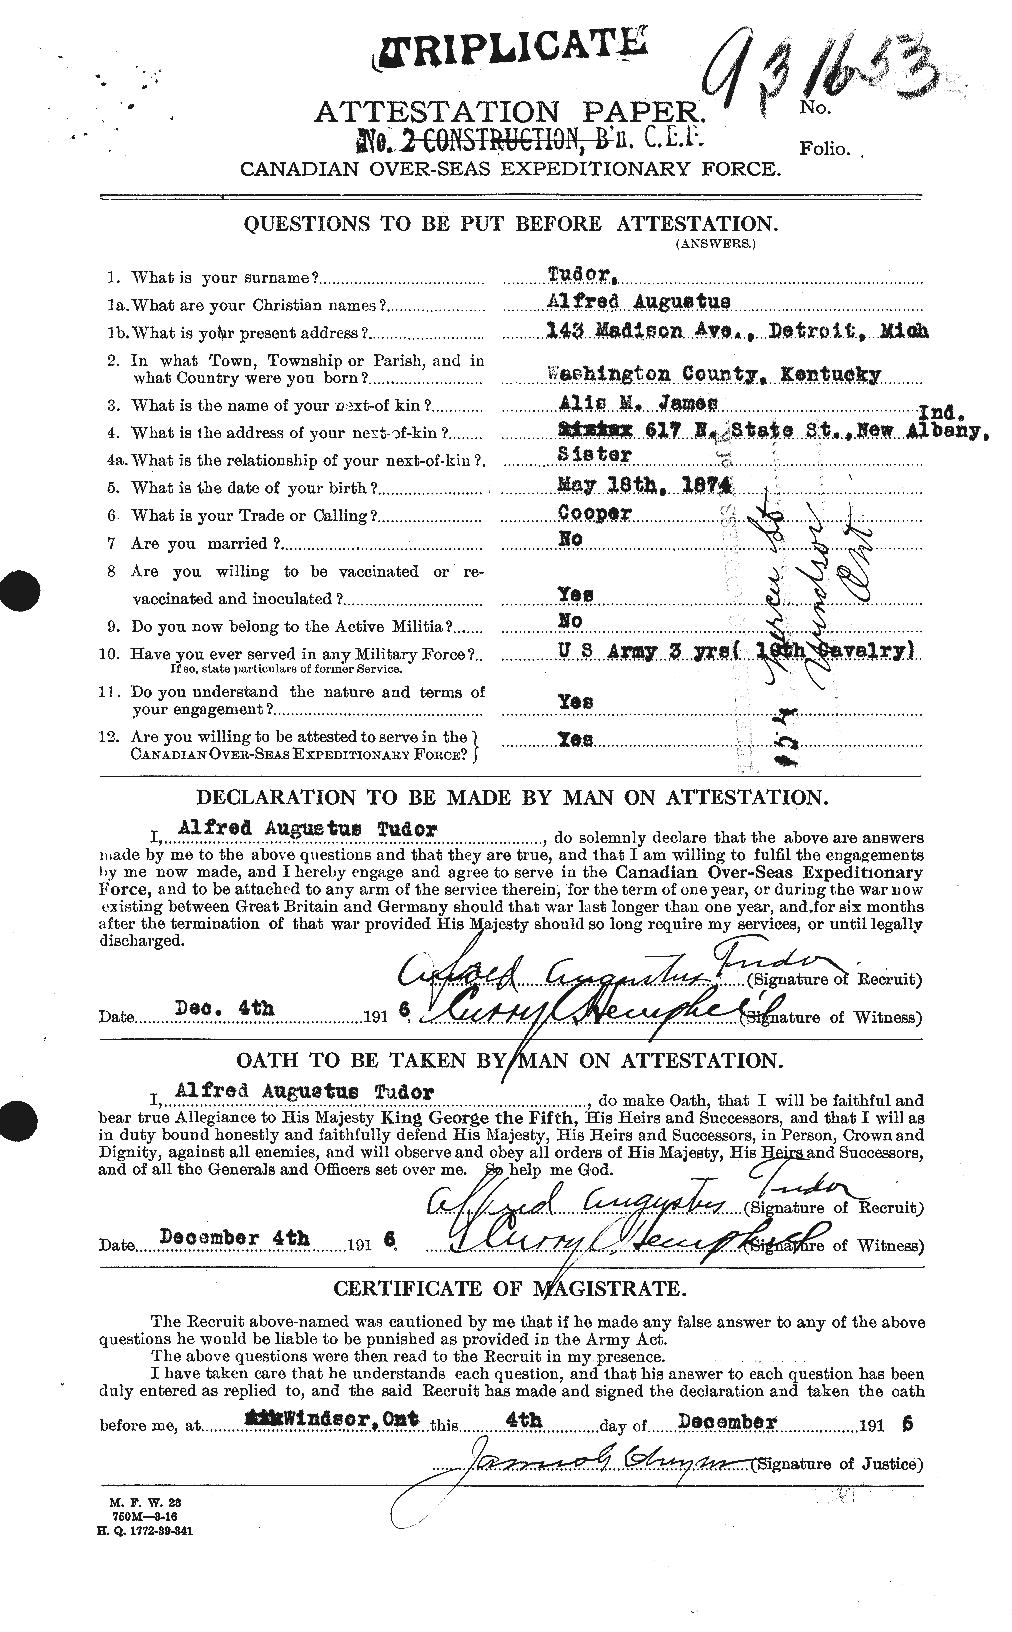 Personnel Records of the First World War - CEF 642946a